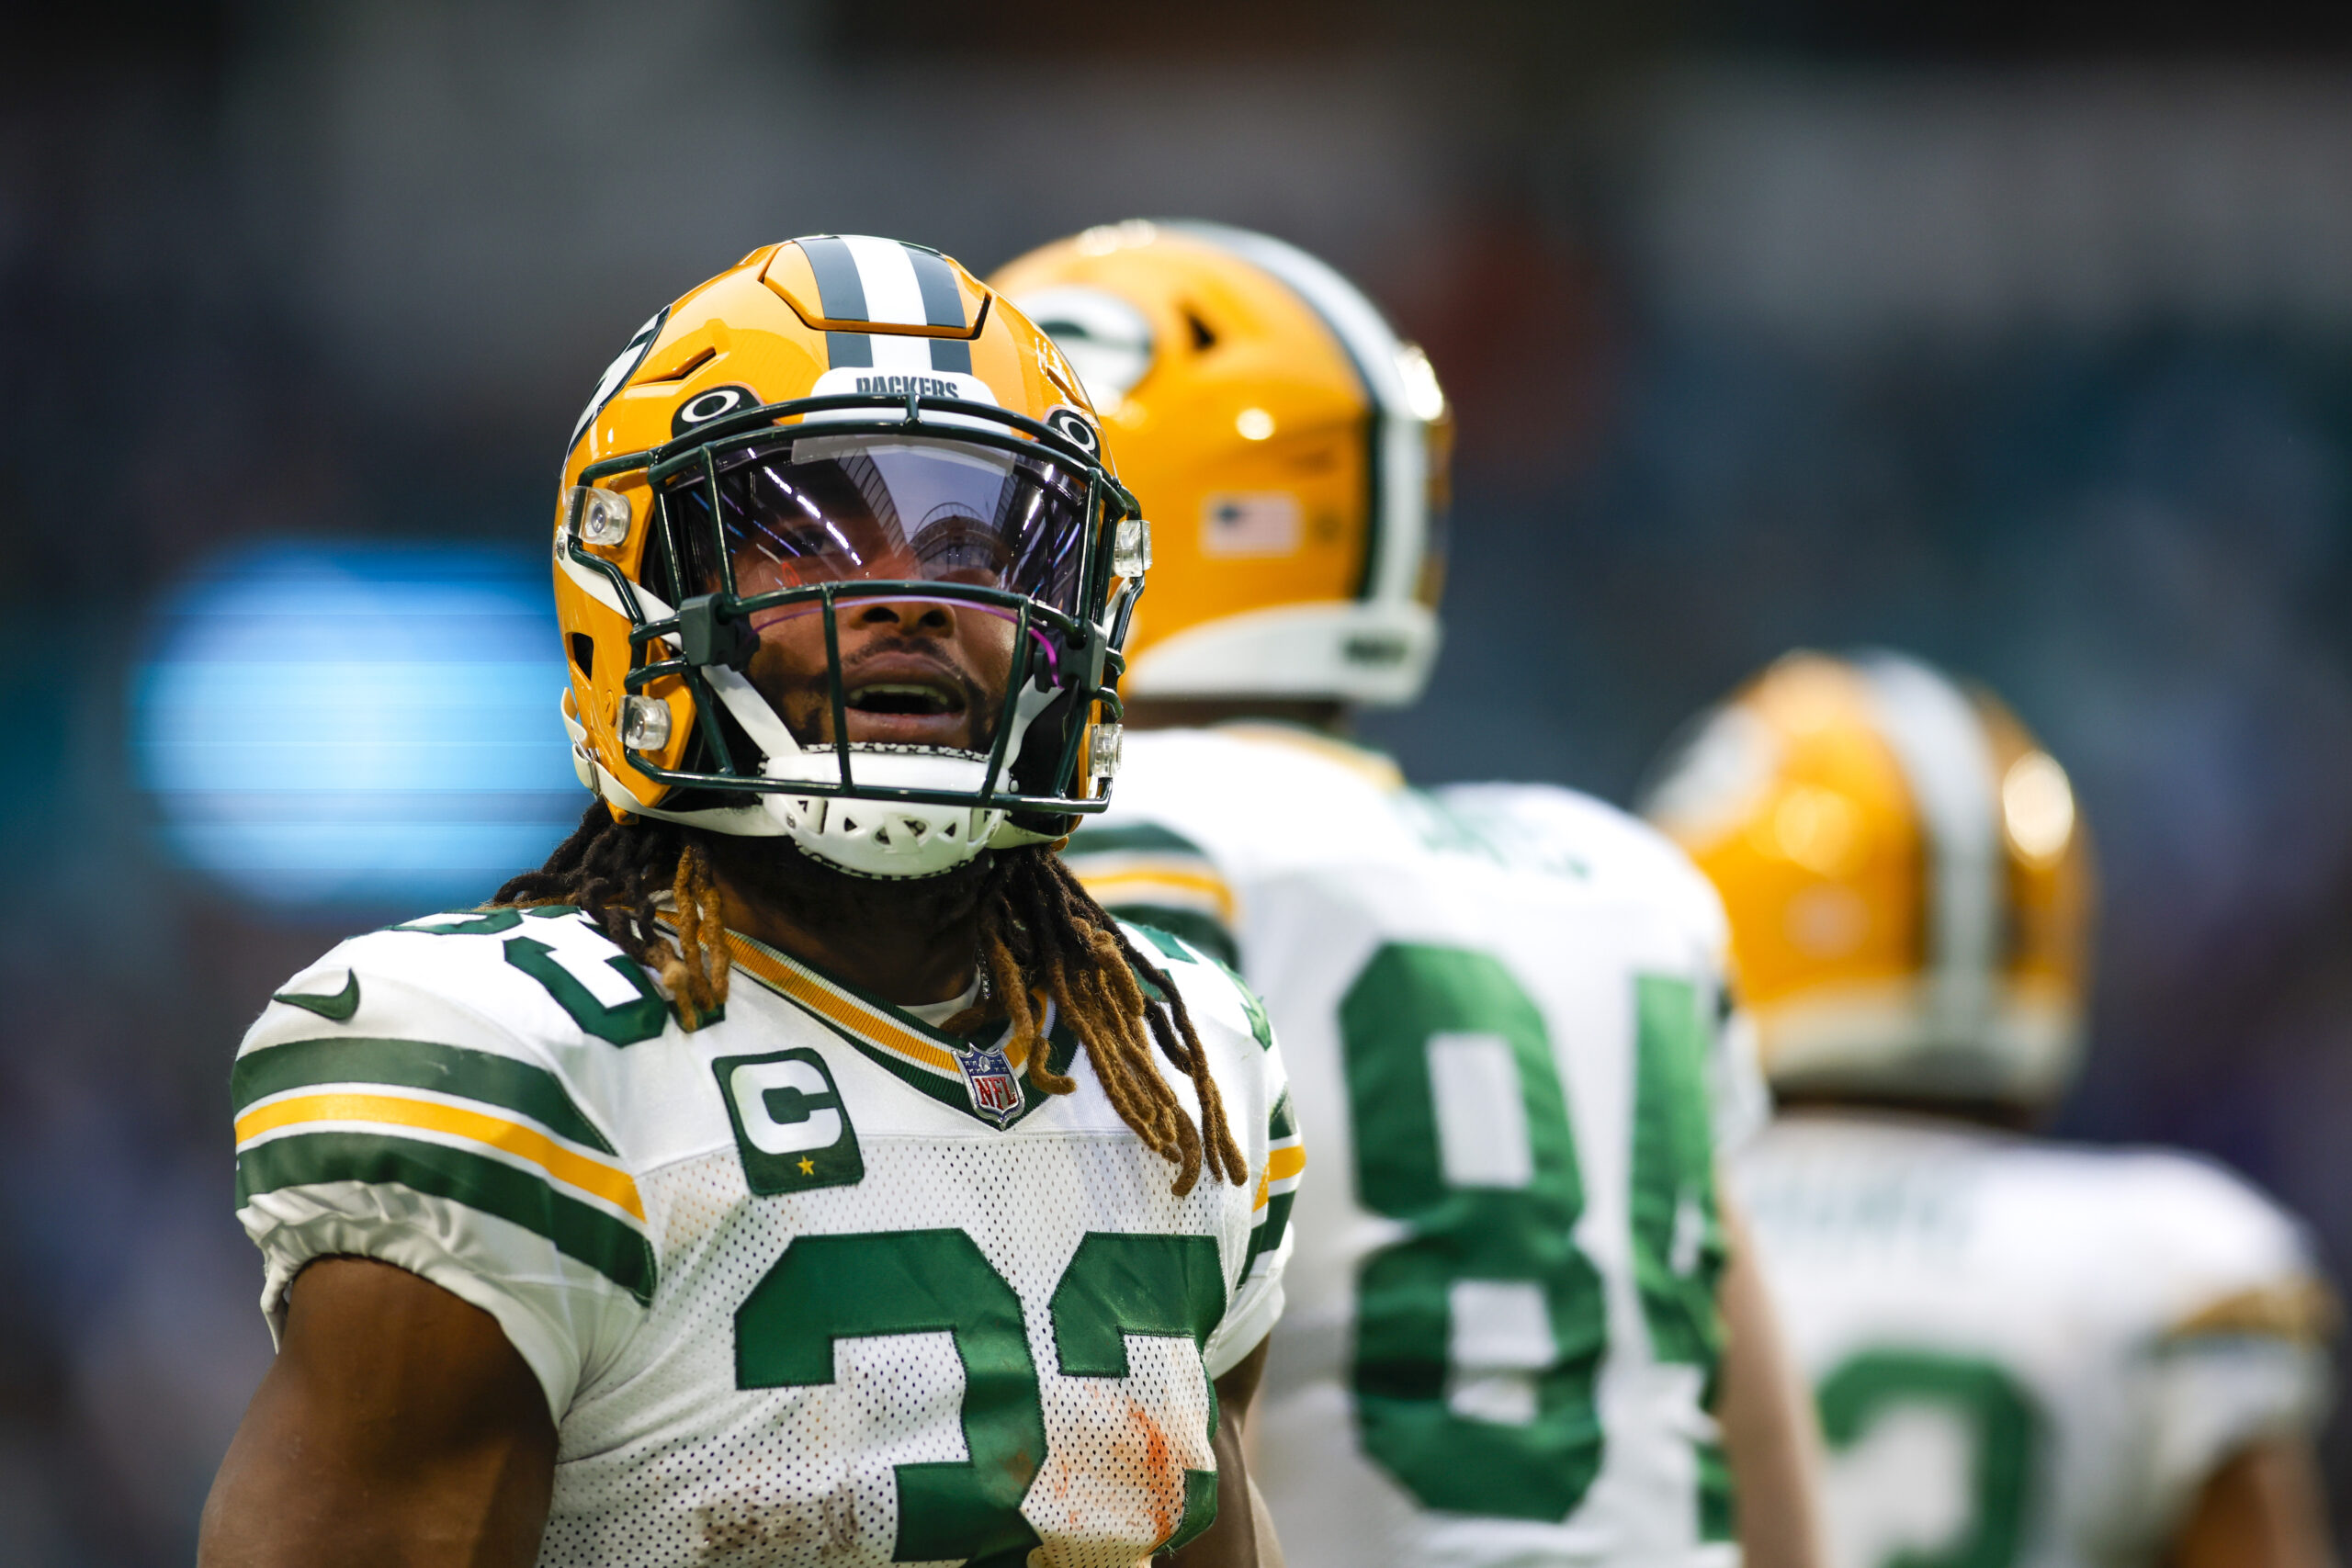 Packers running back AJ Dillon says he wants to make 'defenses